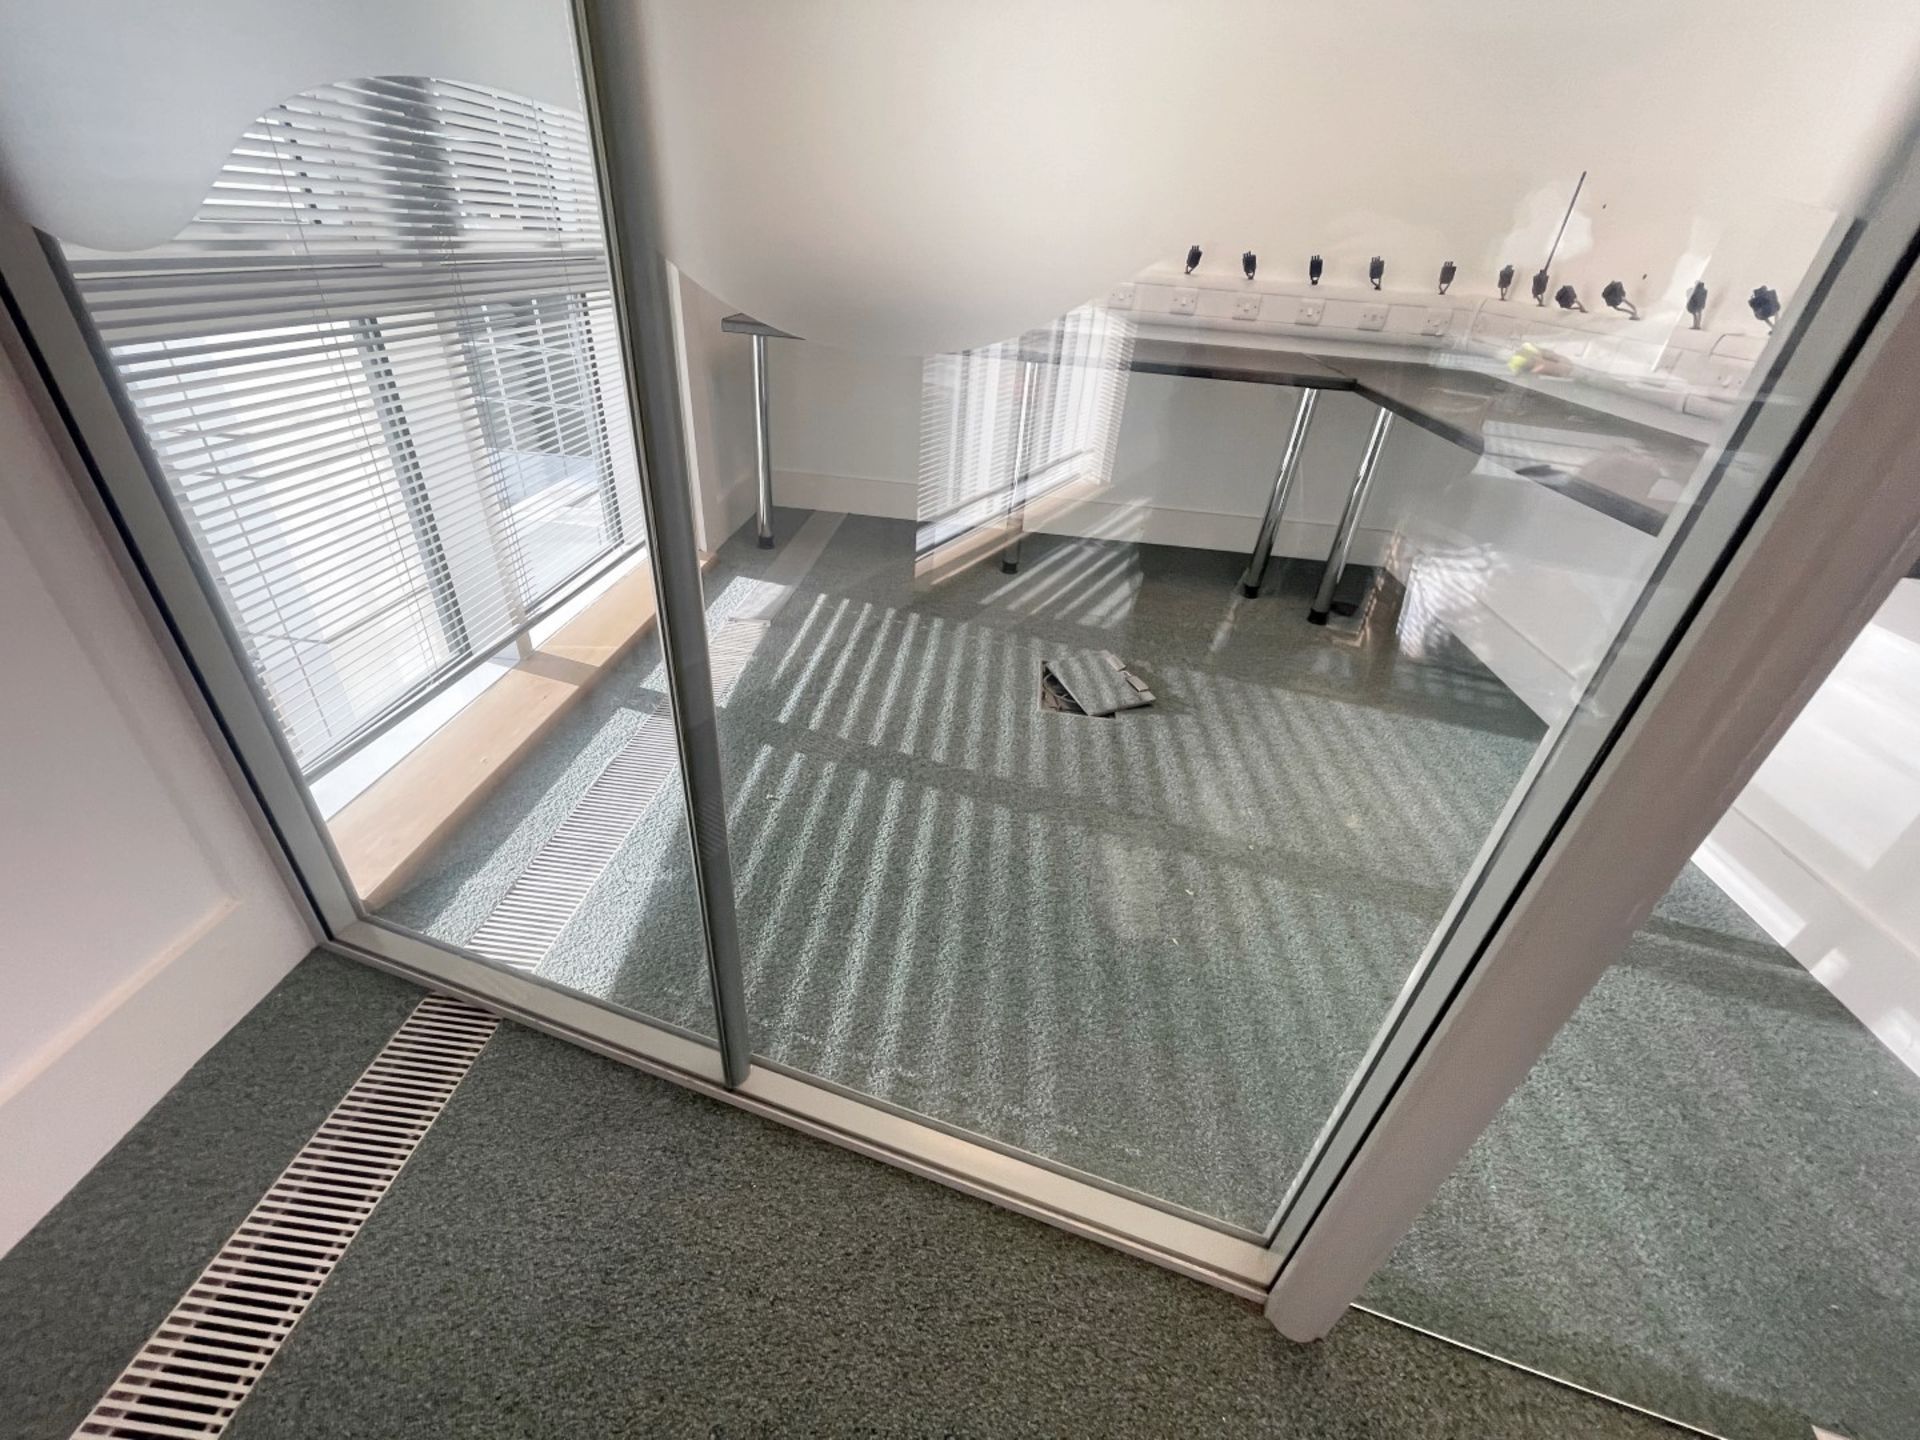 9 x Assorted Glass Office Dividers Panels With 2 x Glass Doors - Currently Covering 2 Offices - Image 11 of 11